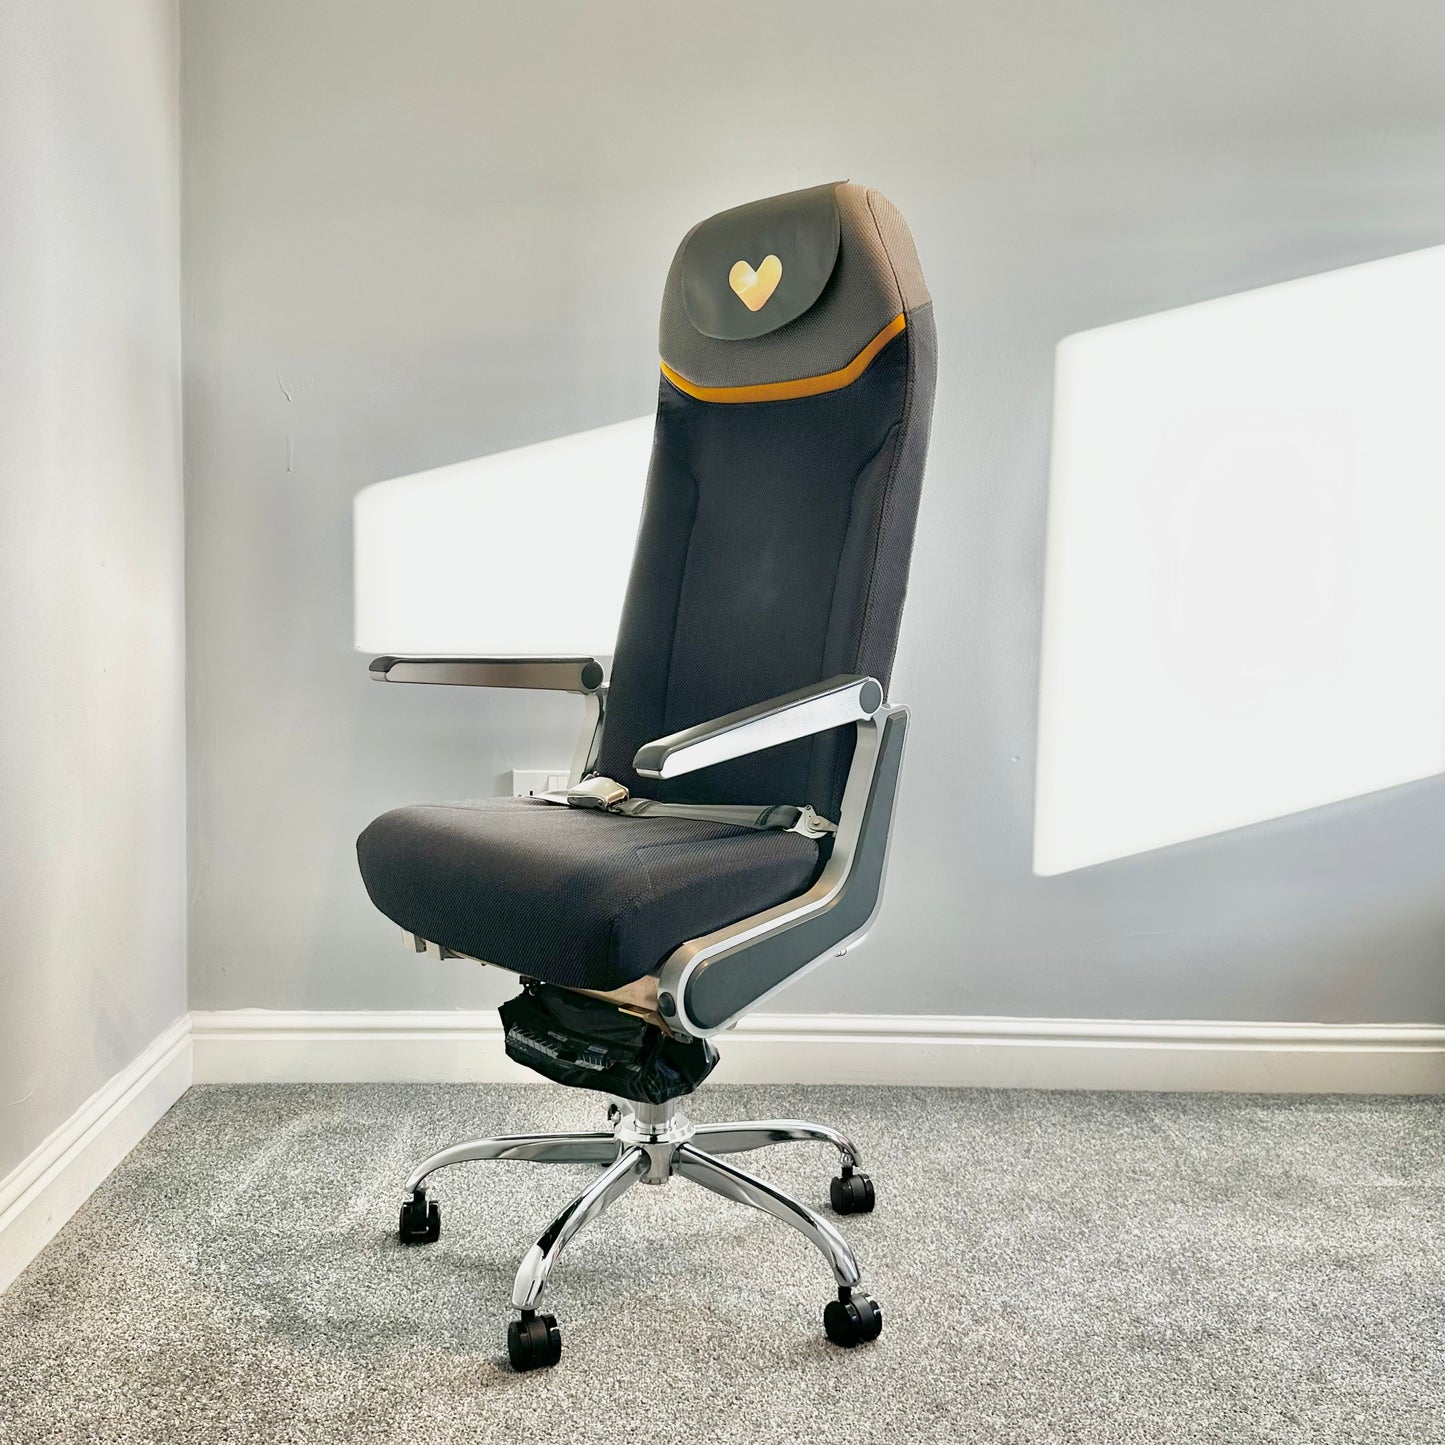 Thomas Cook Cabin Seat Upcycled Office Desk Chair